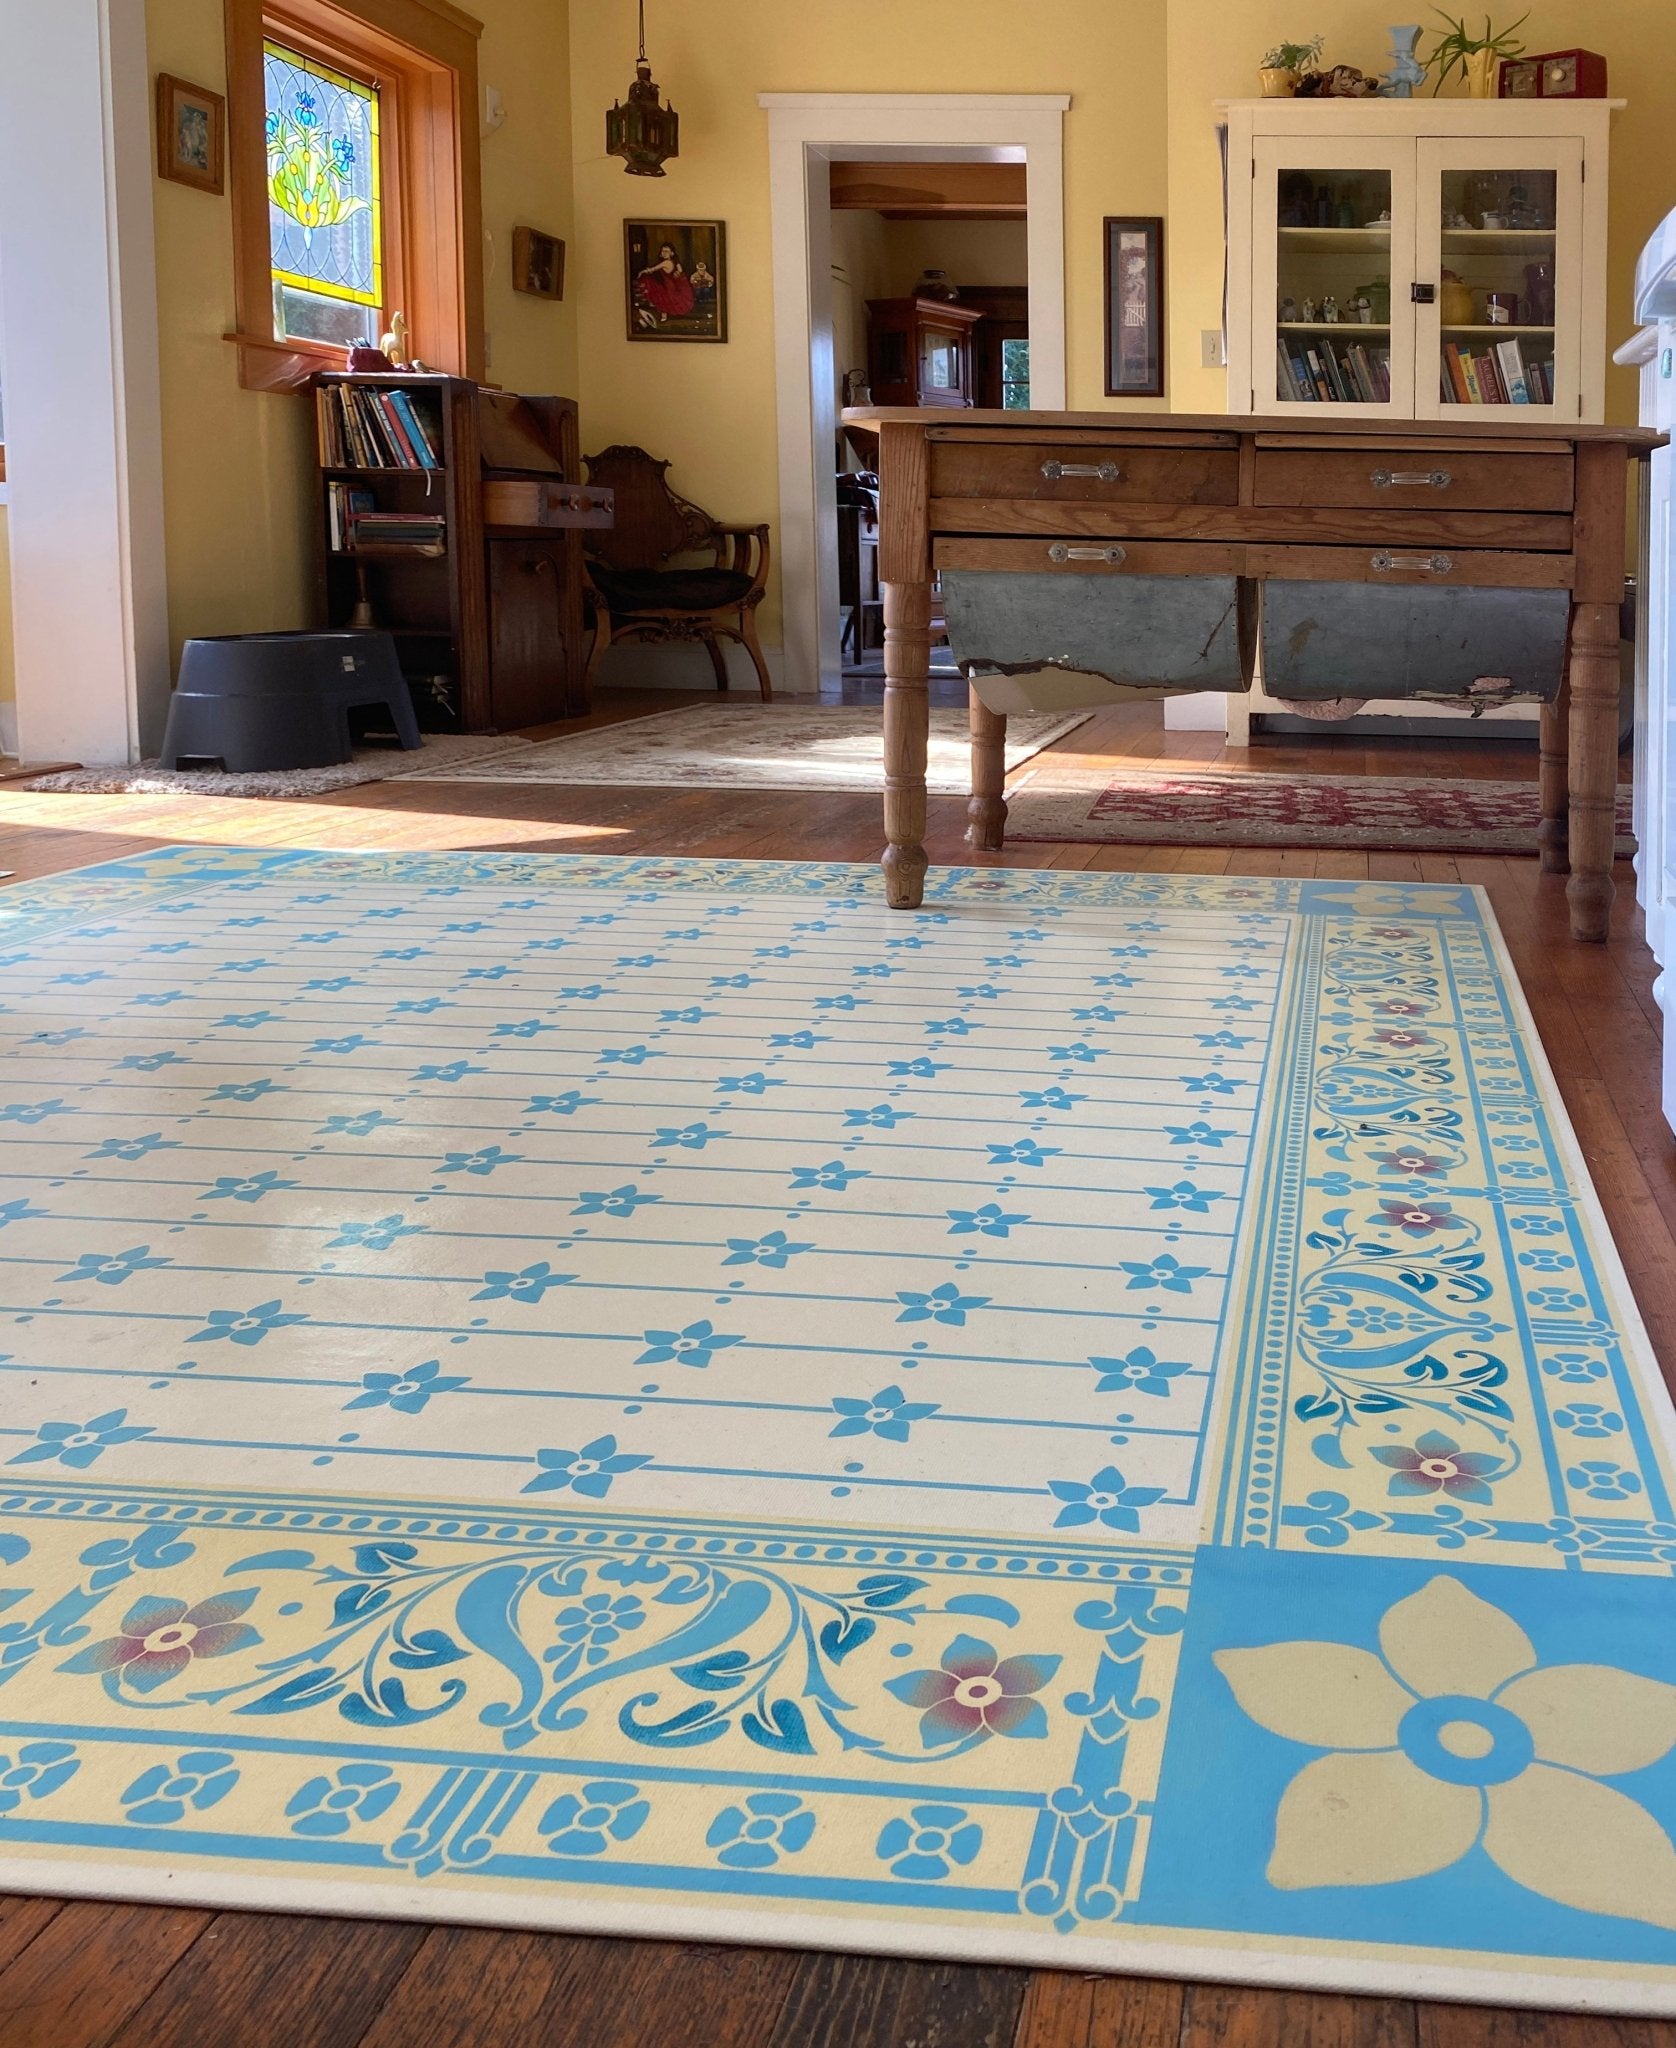 Another in-situ photo of this floorcloth in its 1880 farmhouse home.